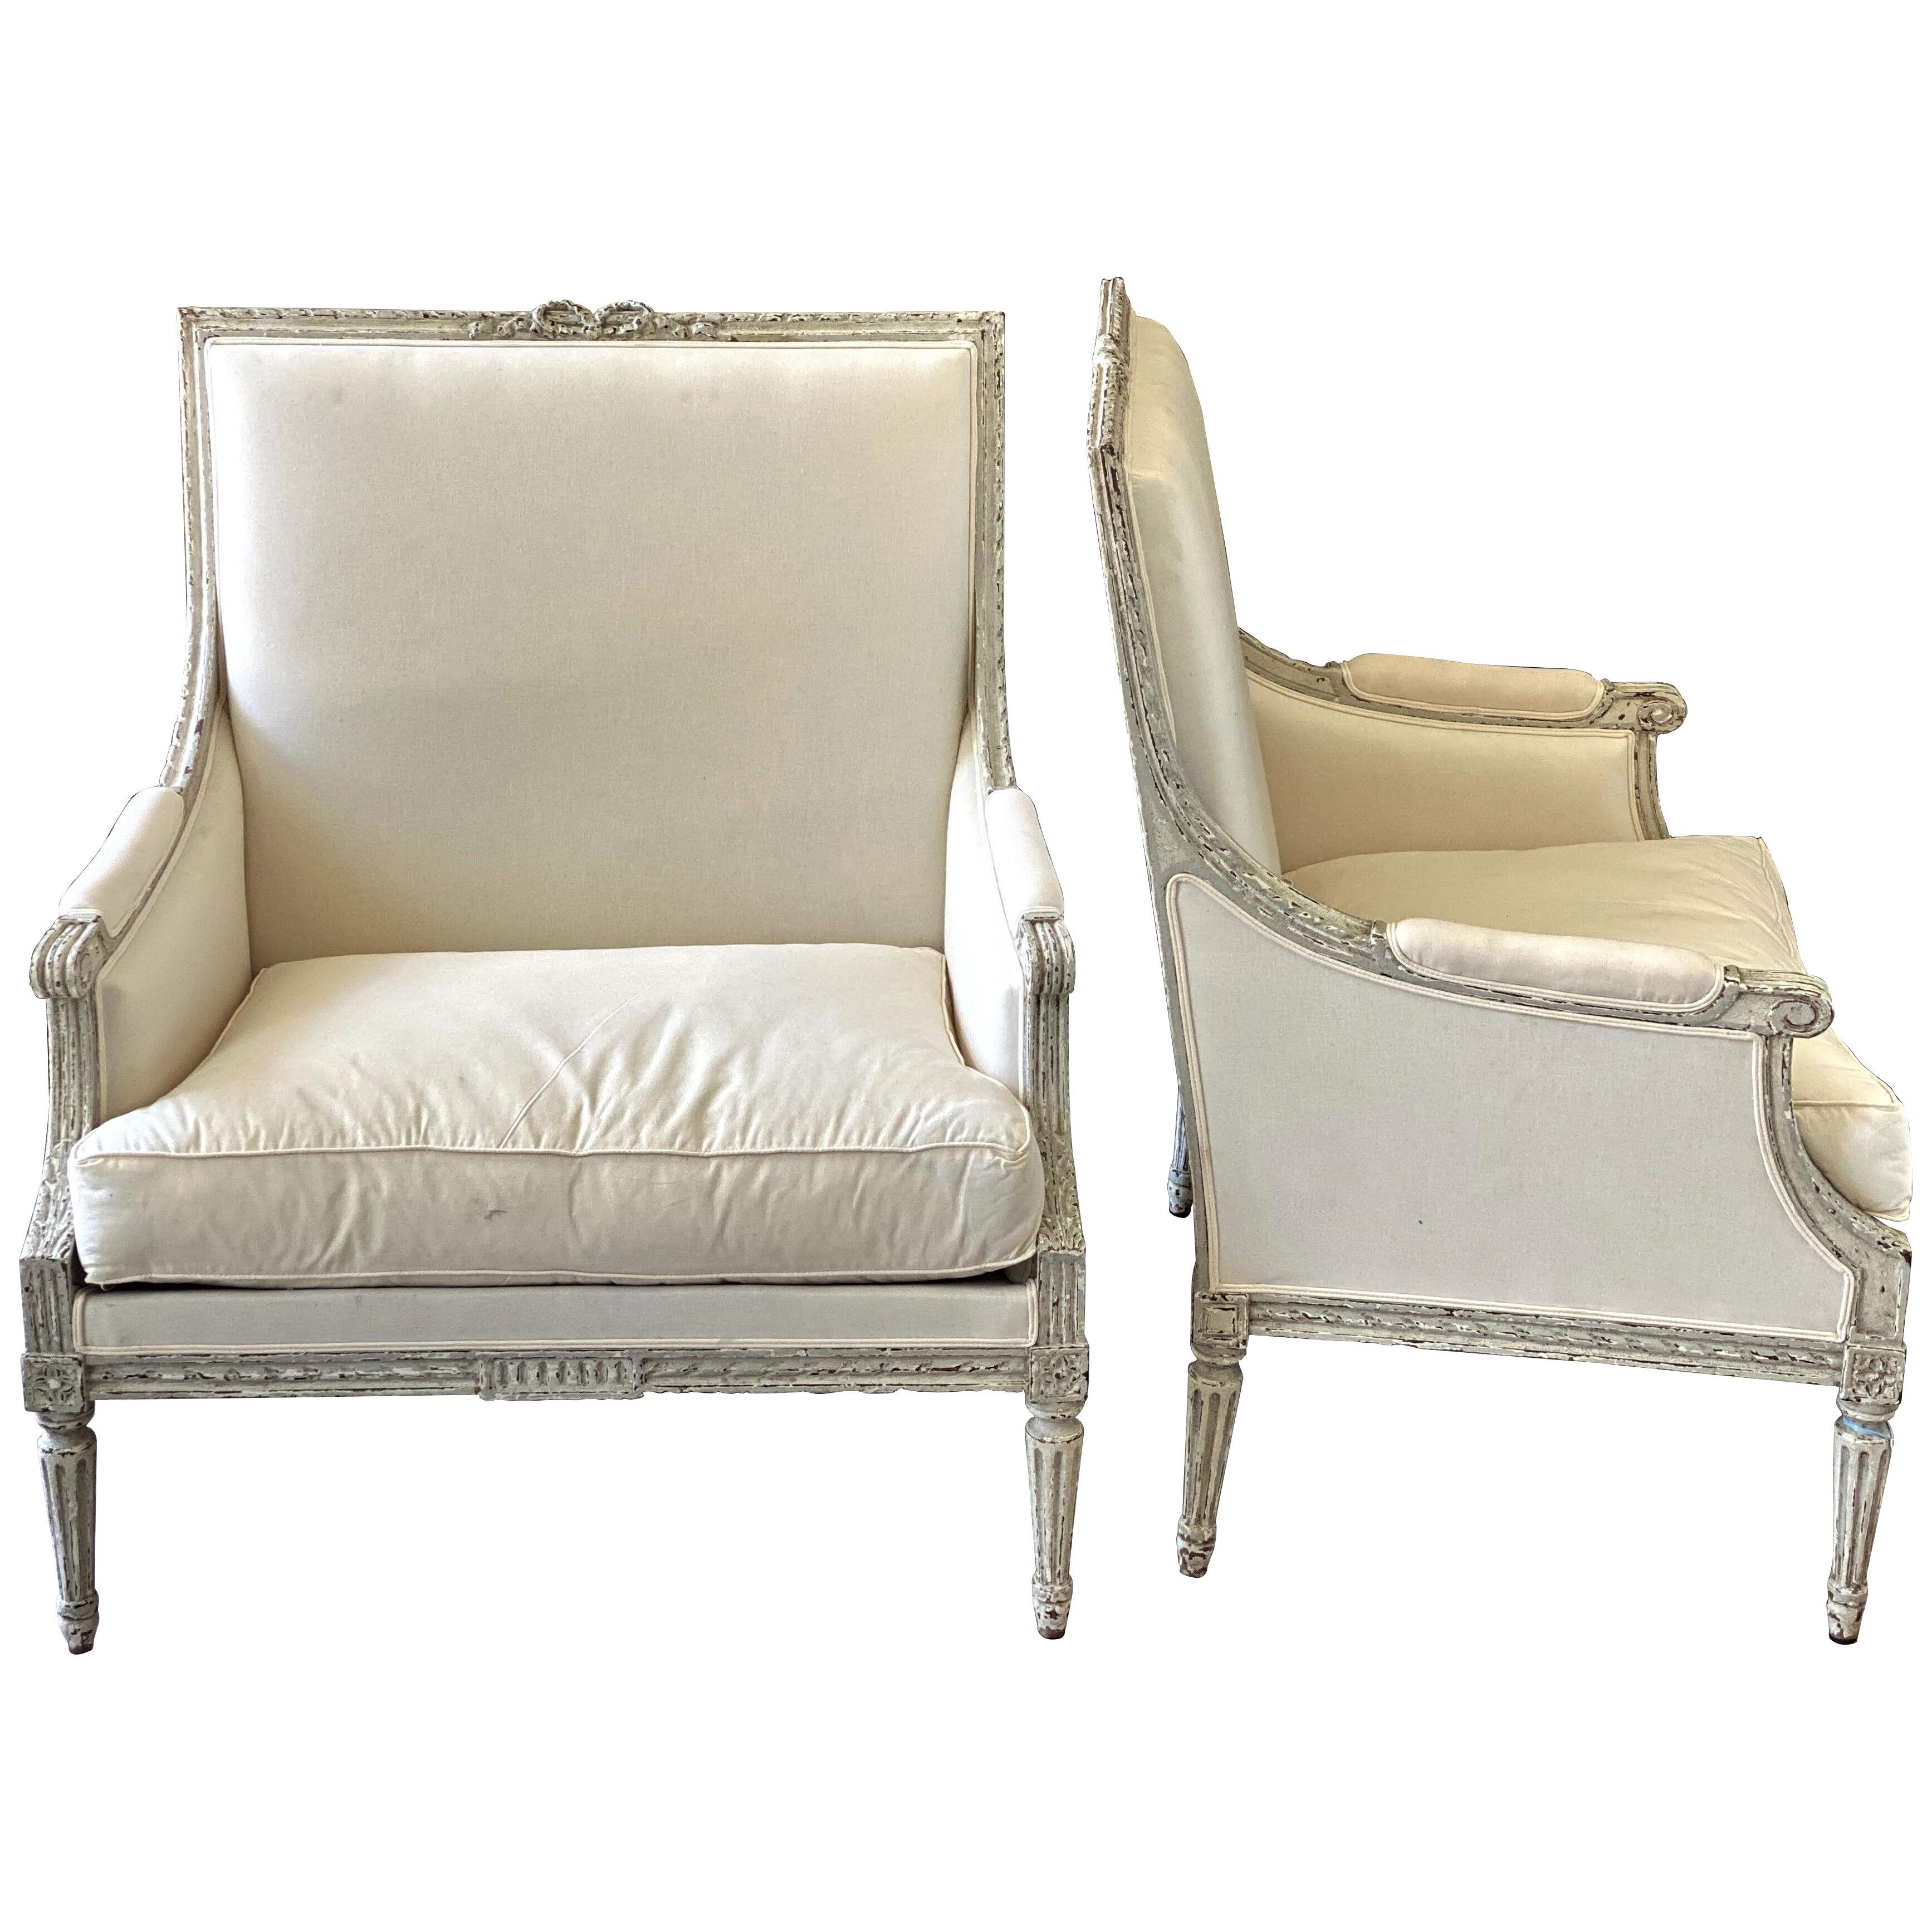 Pair of 19th C French Marquis Louis XVI Bergeres